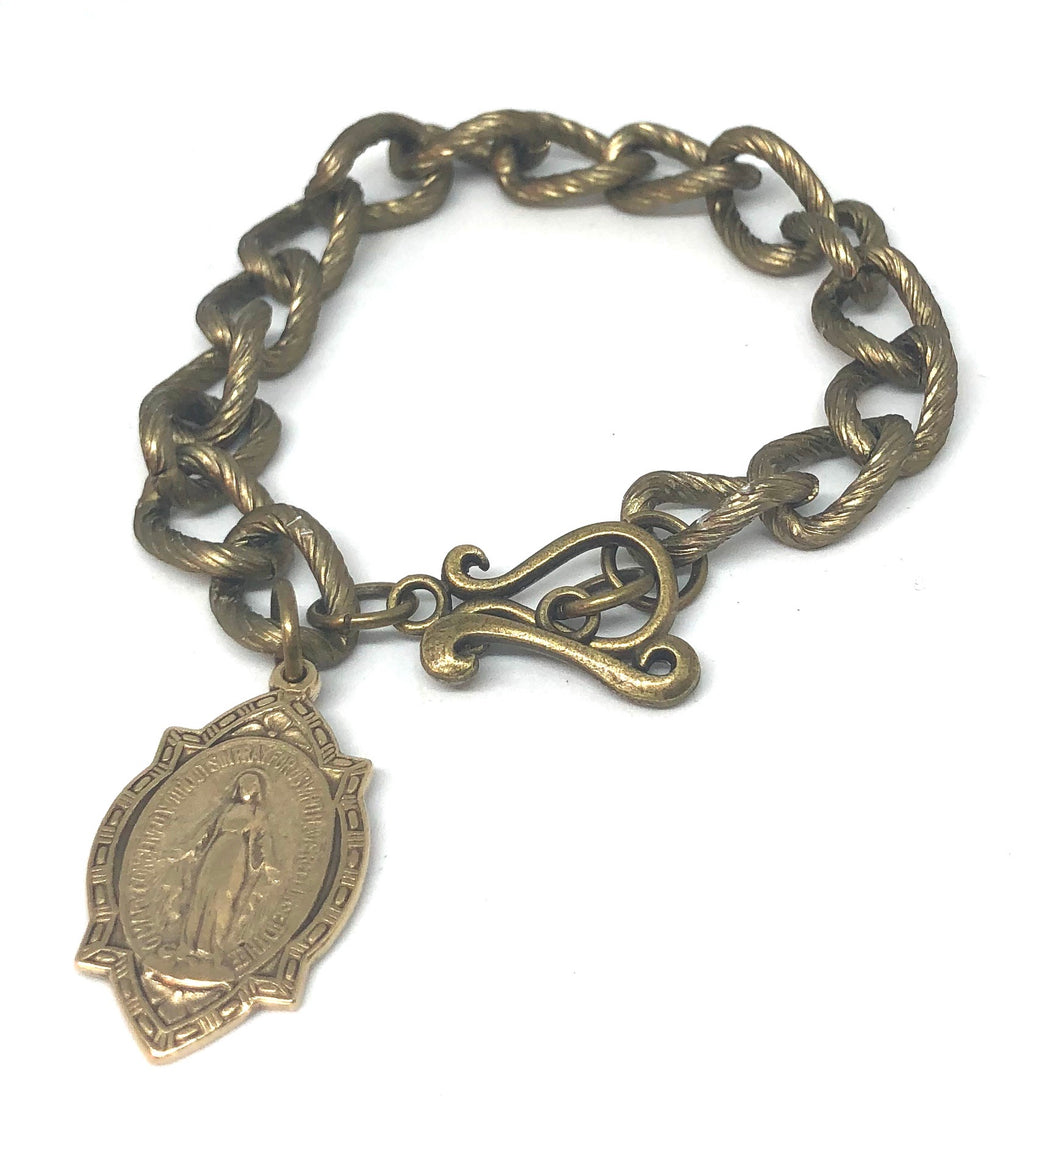 Antique Brass Chain Link Bracelet with Blessed MothervMedal